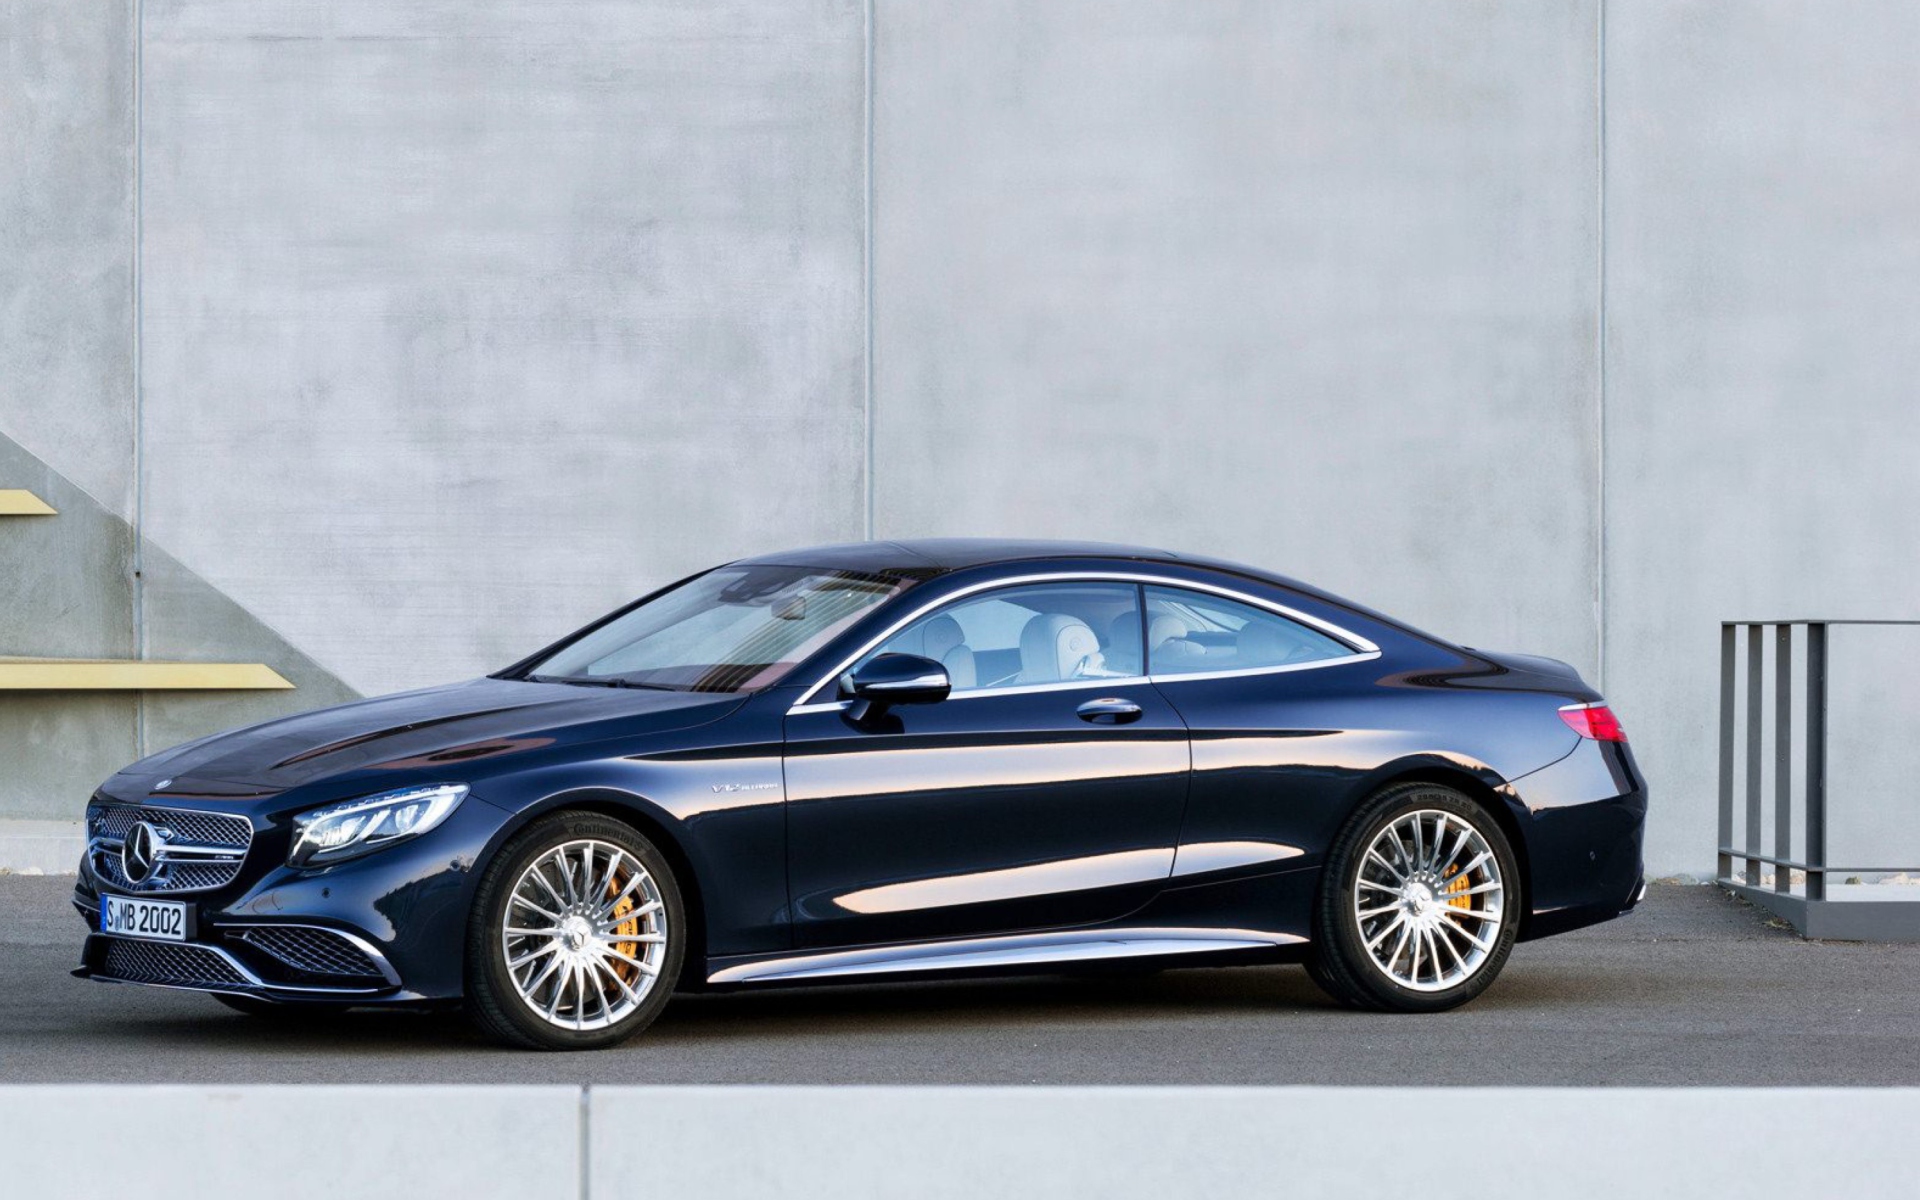 Mercedes-Benz S65 AMG Coupe wallpaper 1920x1200